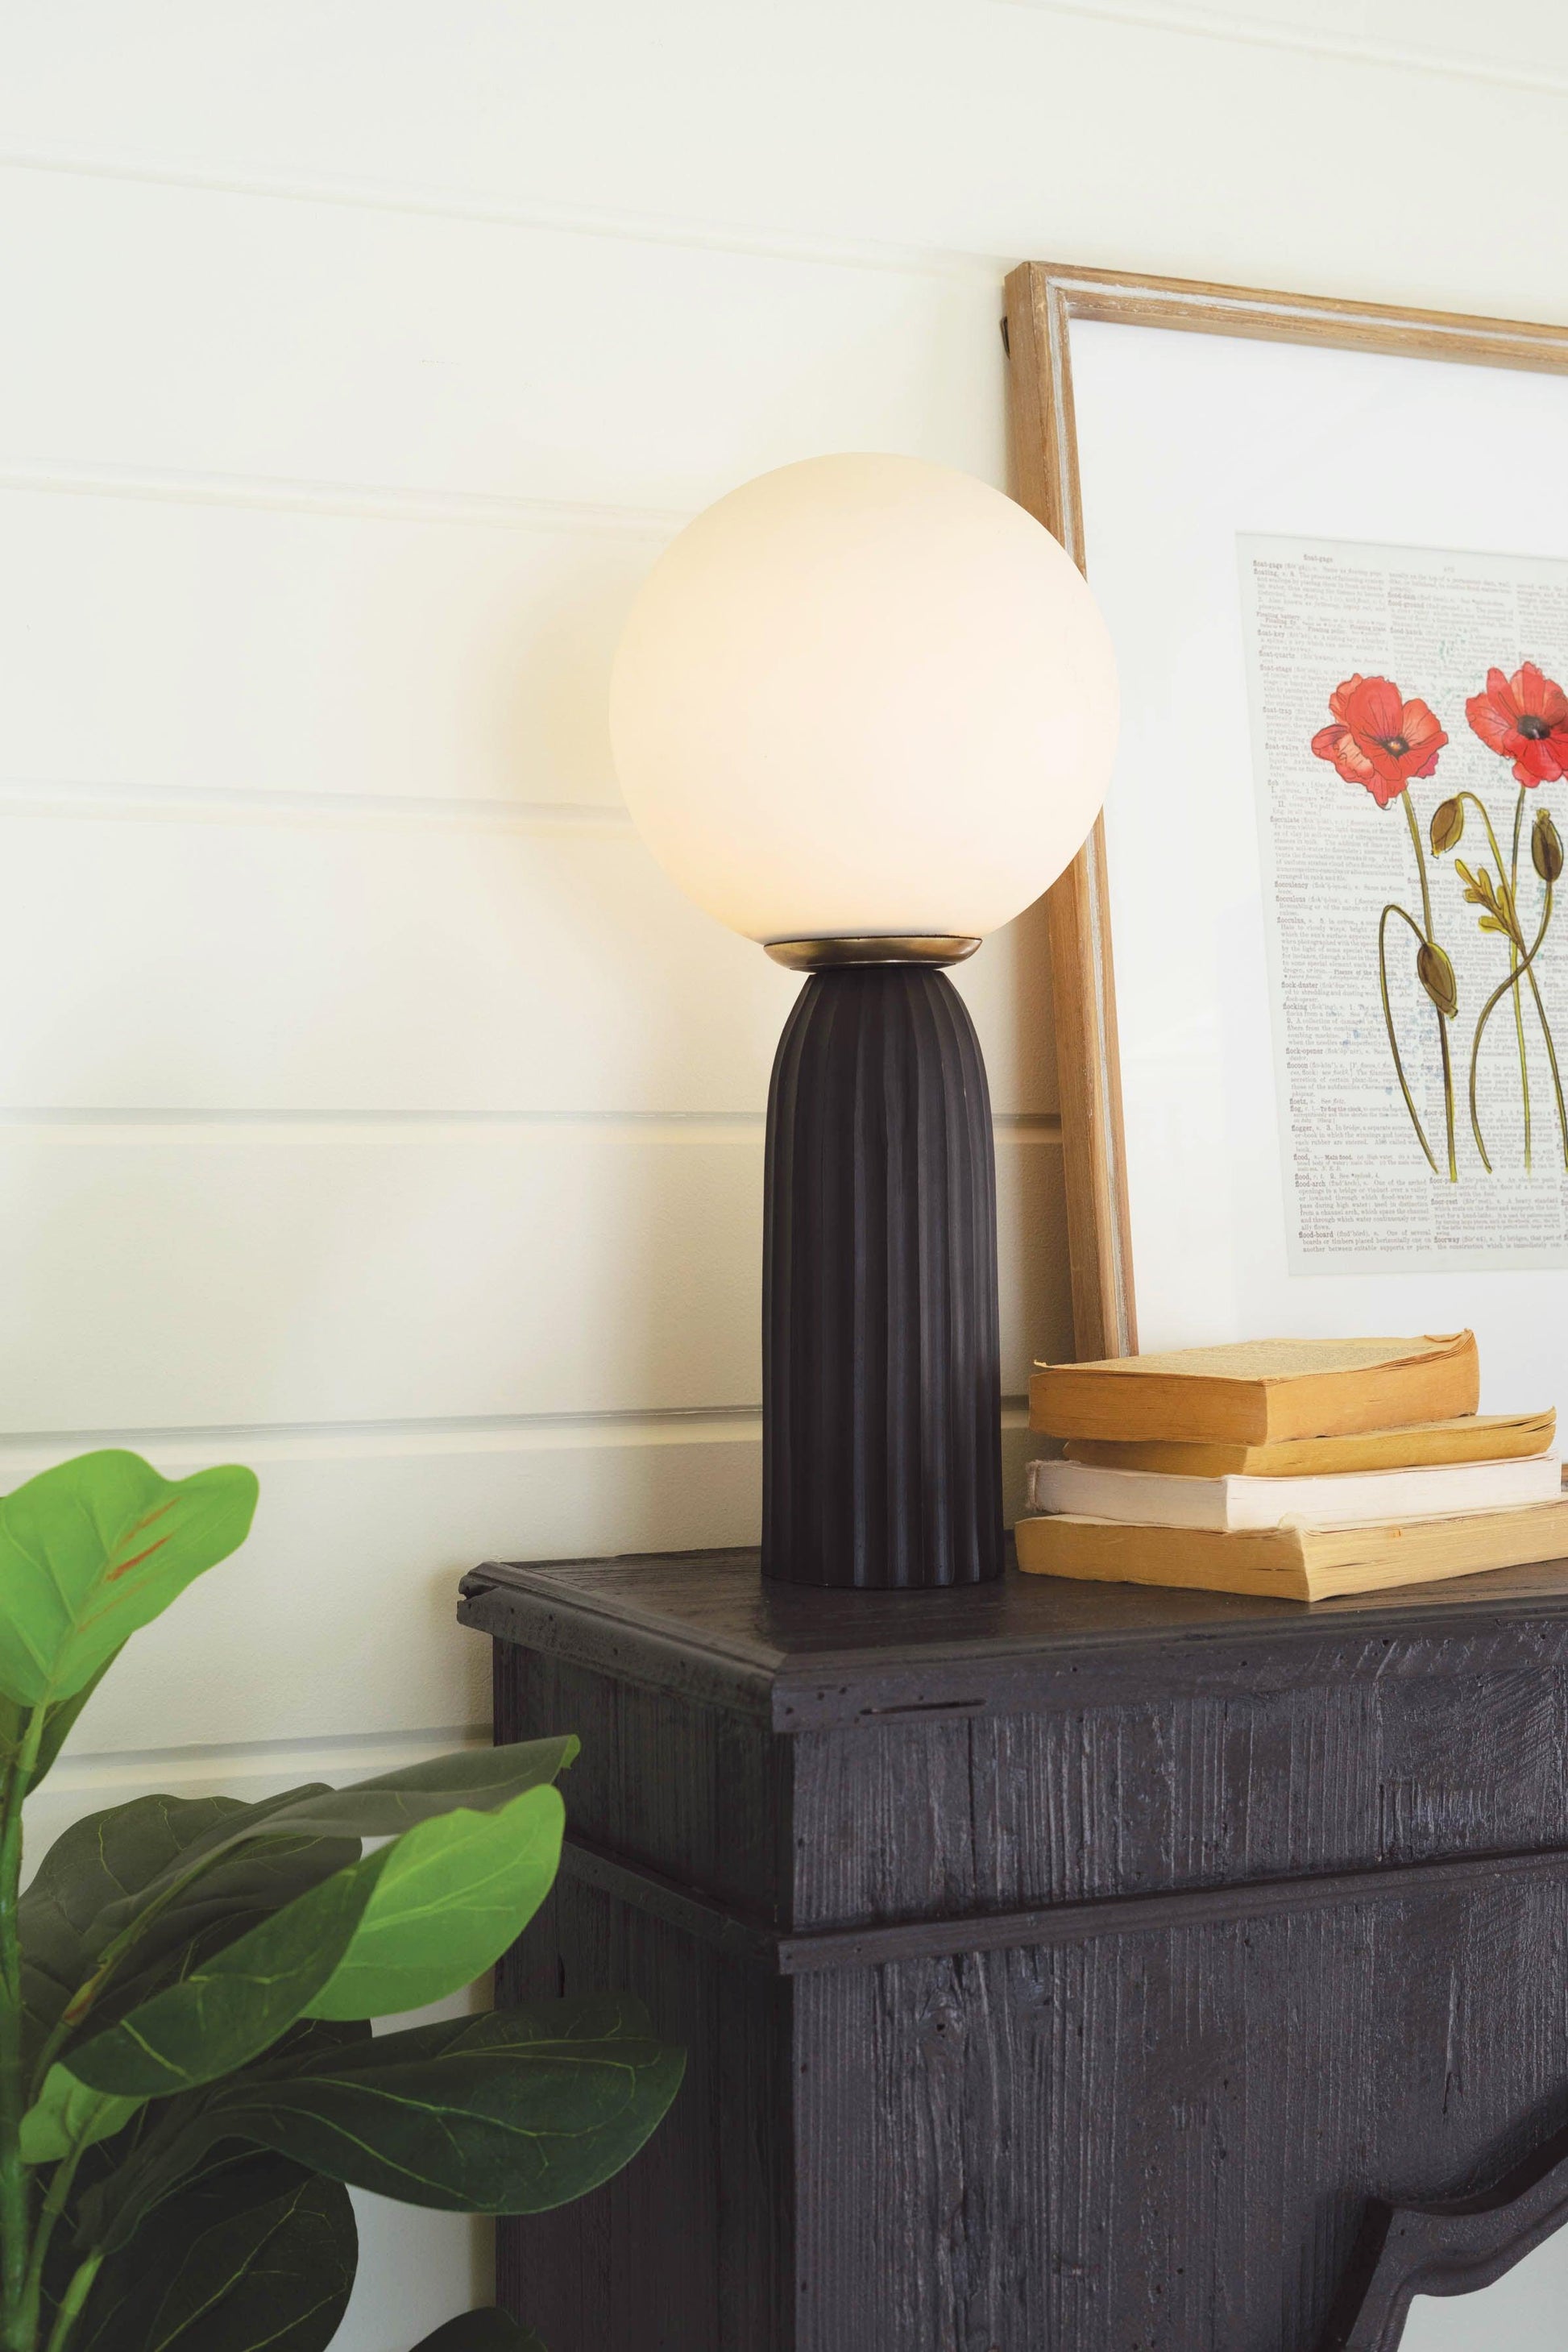 The Globe  |  Lamp - CURATED BY MAVENS, LTD.